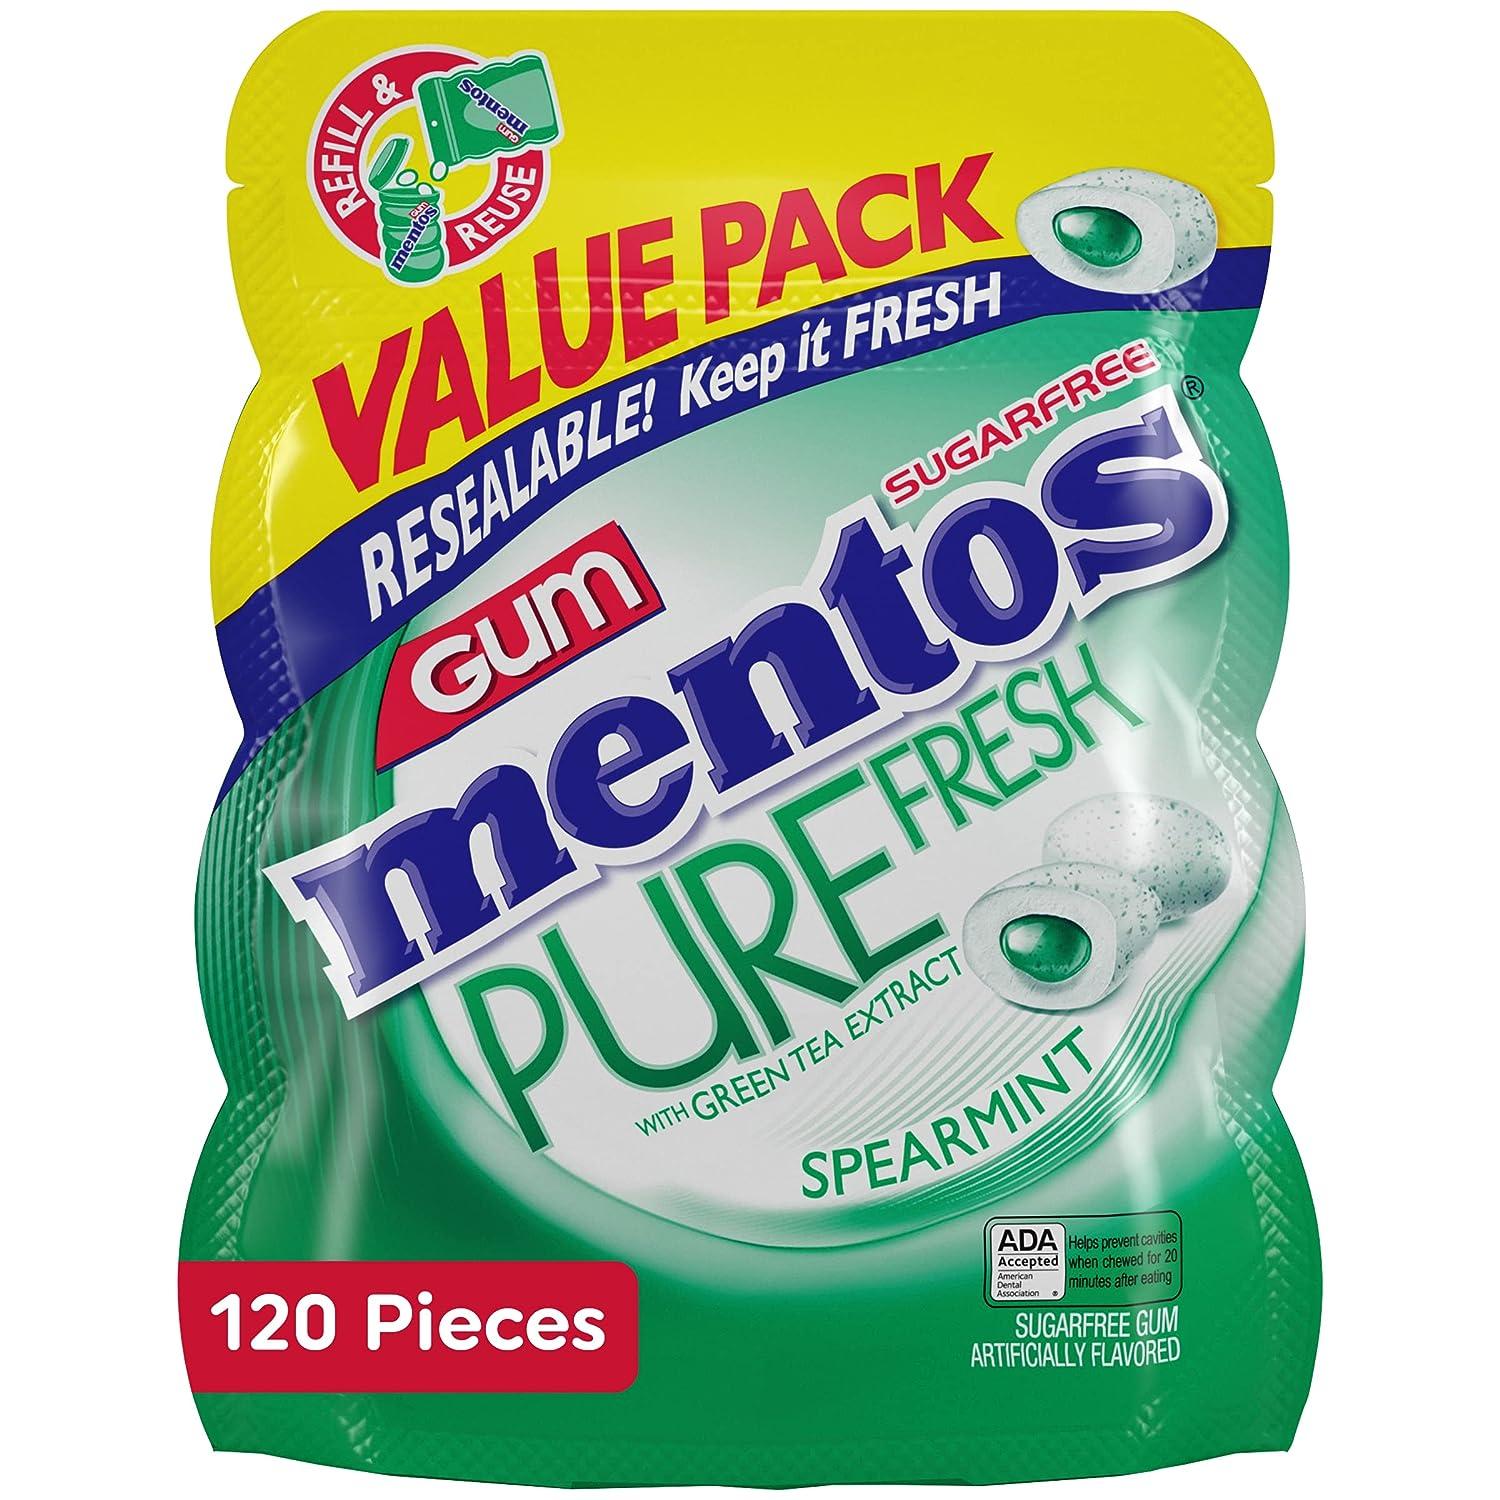 Mentos Pure Fresh Spearmint Xylitol Gum 120 Pack for $3.79